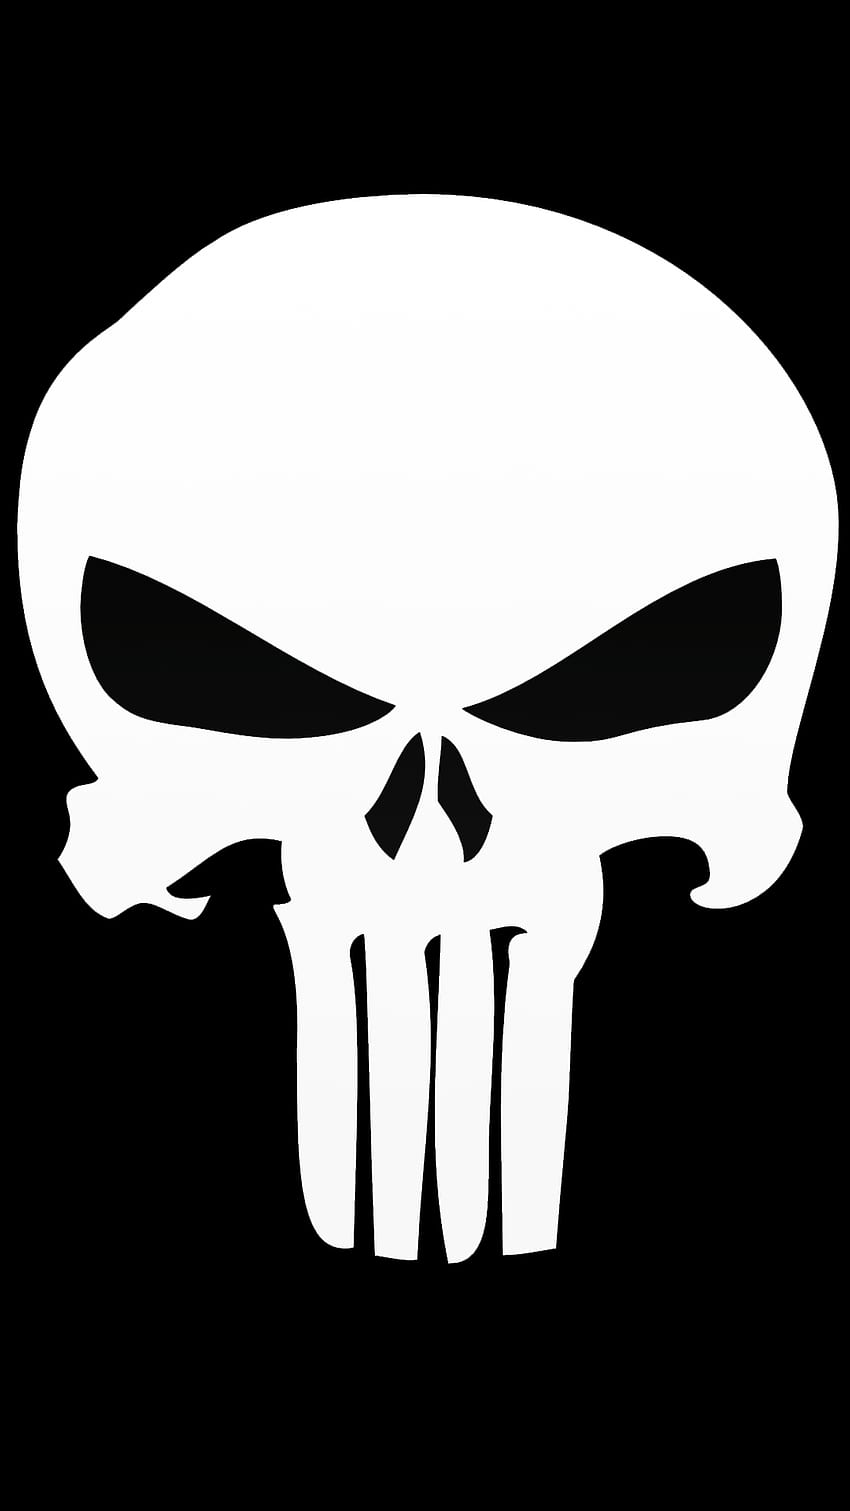 Our Punisher Skull For Android Phones .0223 HD phone wallpaper